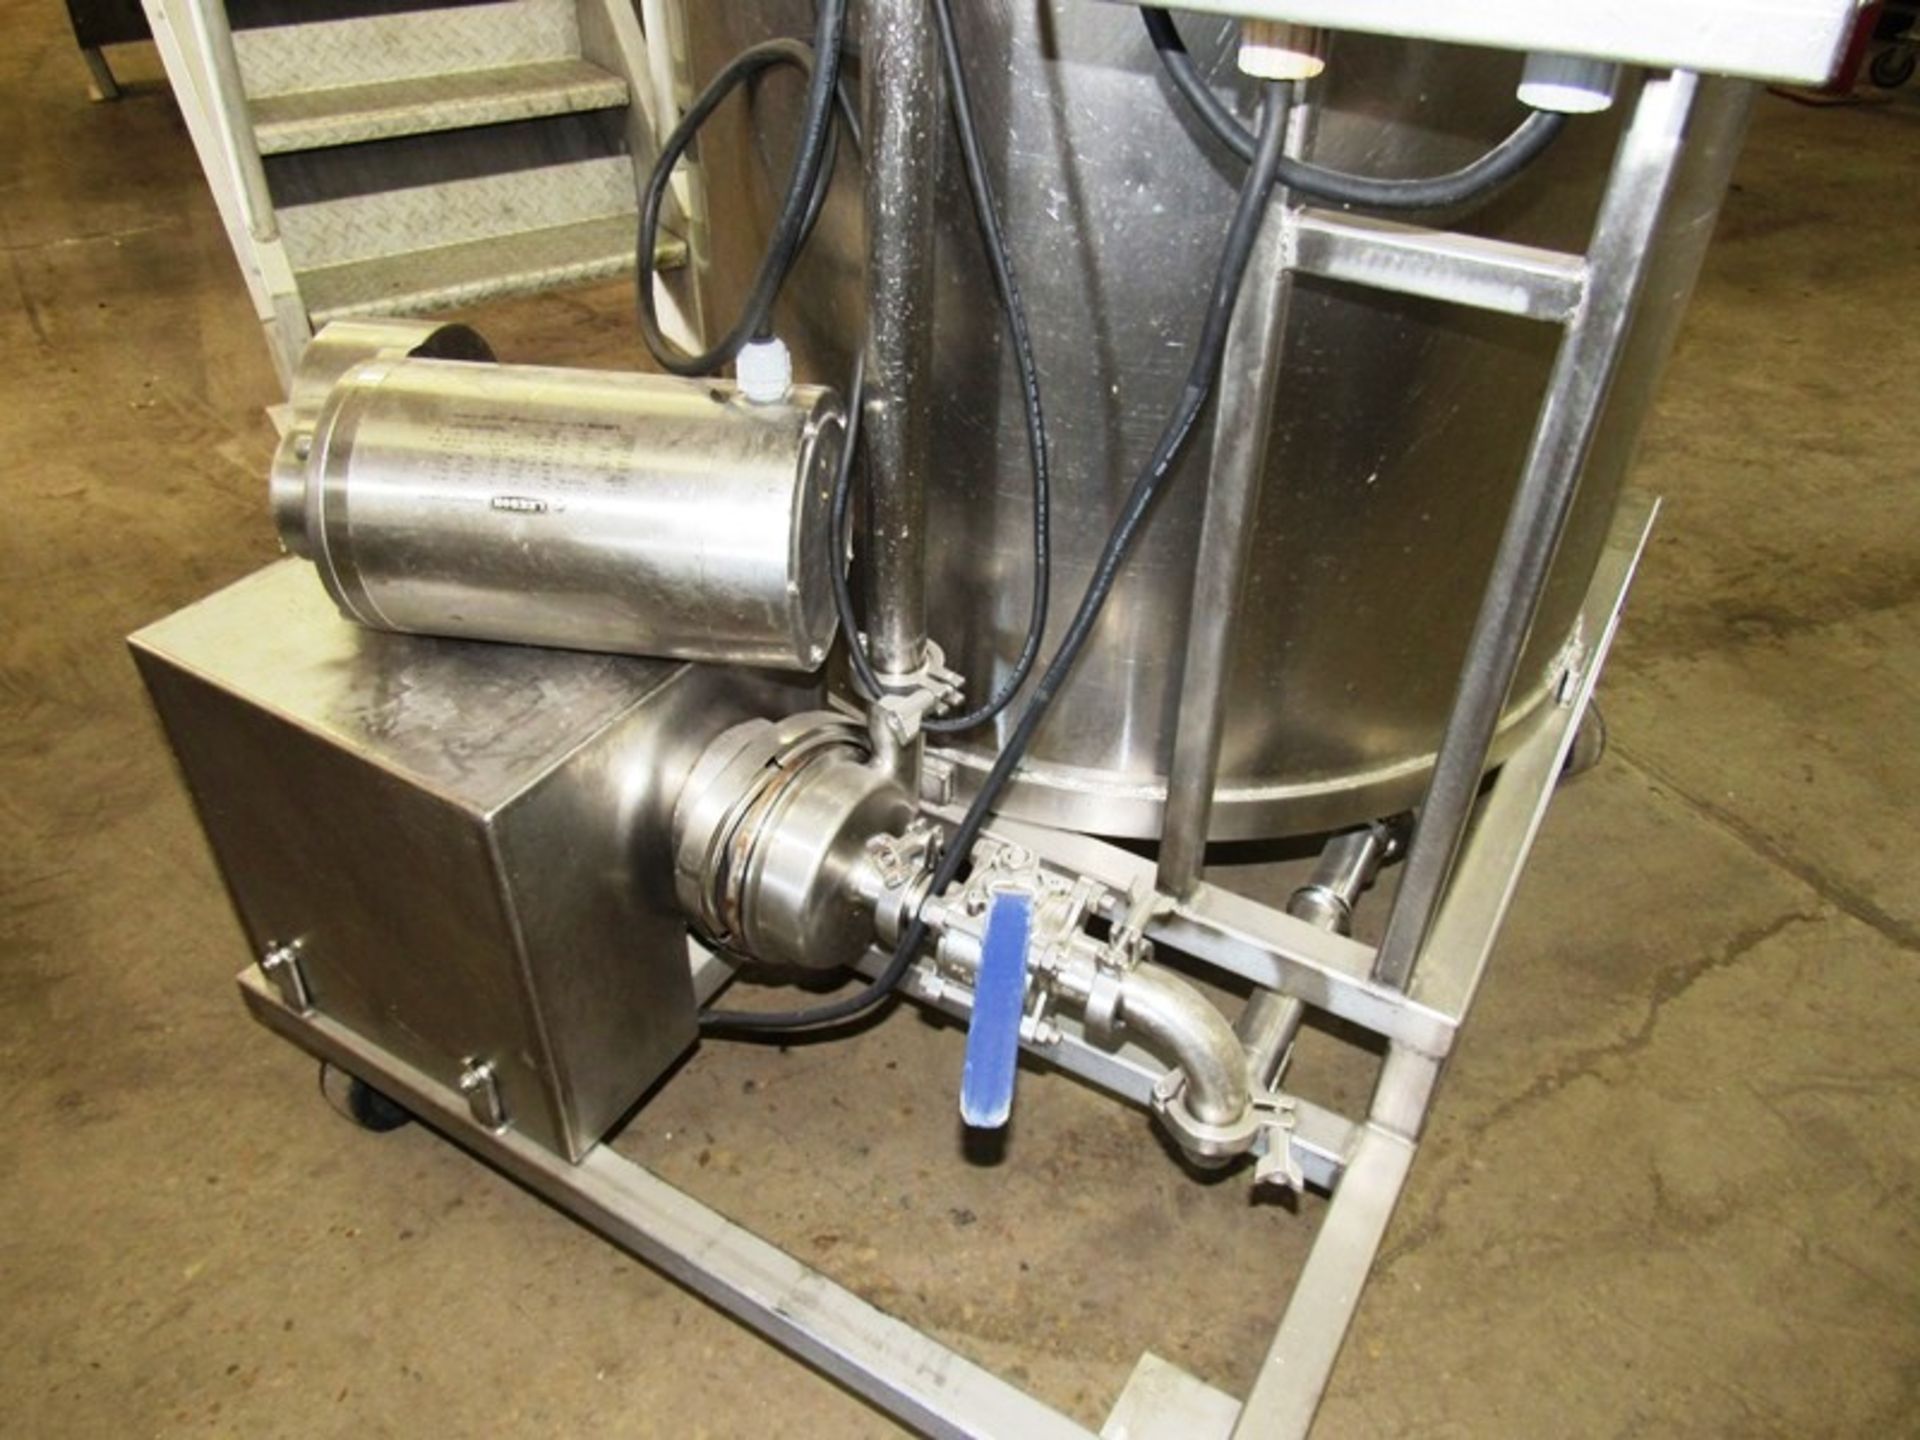 Portable Stainless Steel Mix Tank with pump, 30" Dia. X 36" D, 1 h.p., 208-230/460 volts motors, - Image 4 of 5